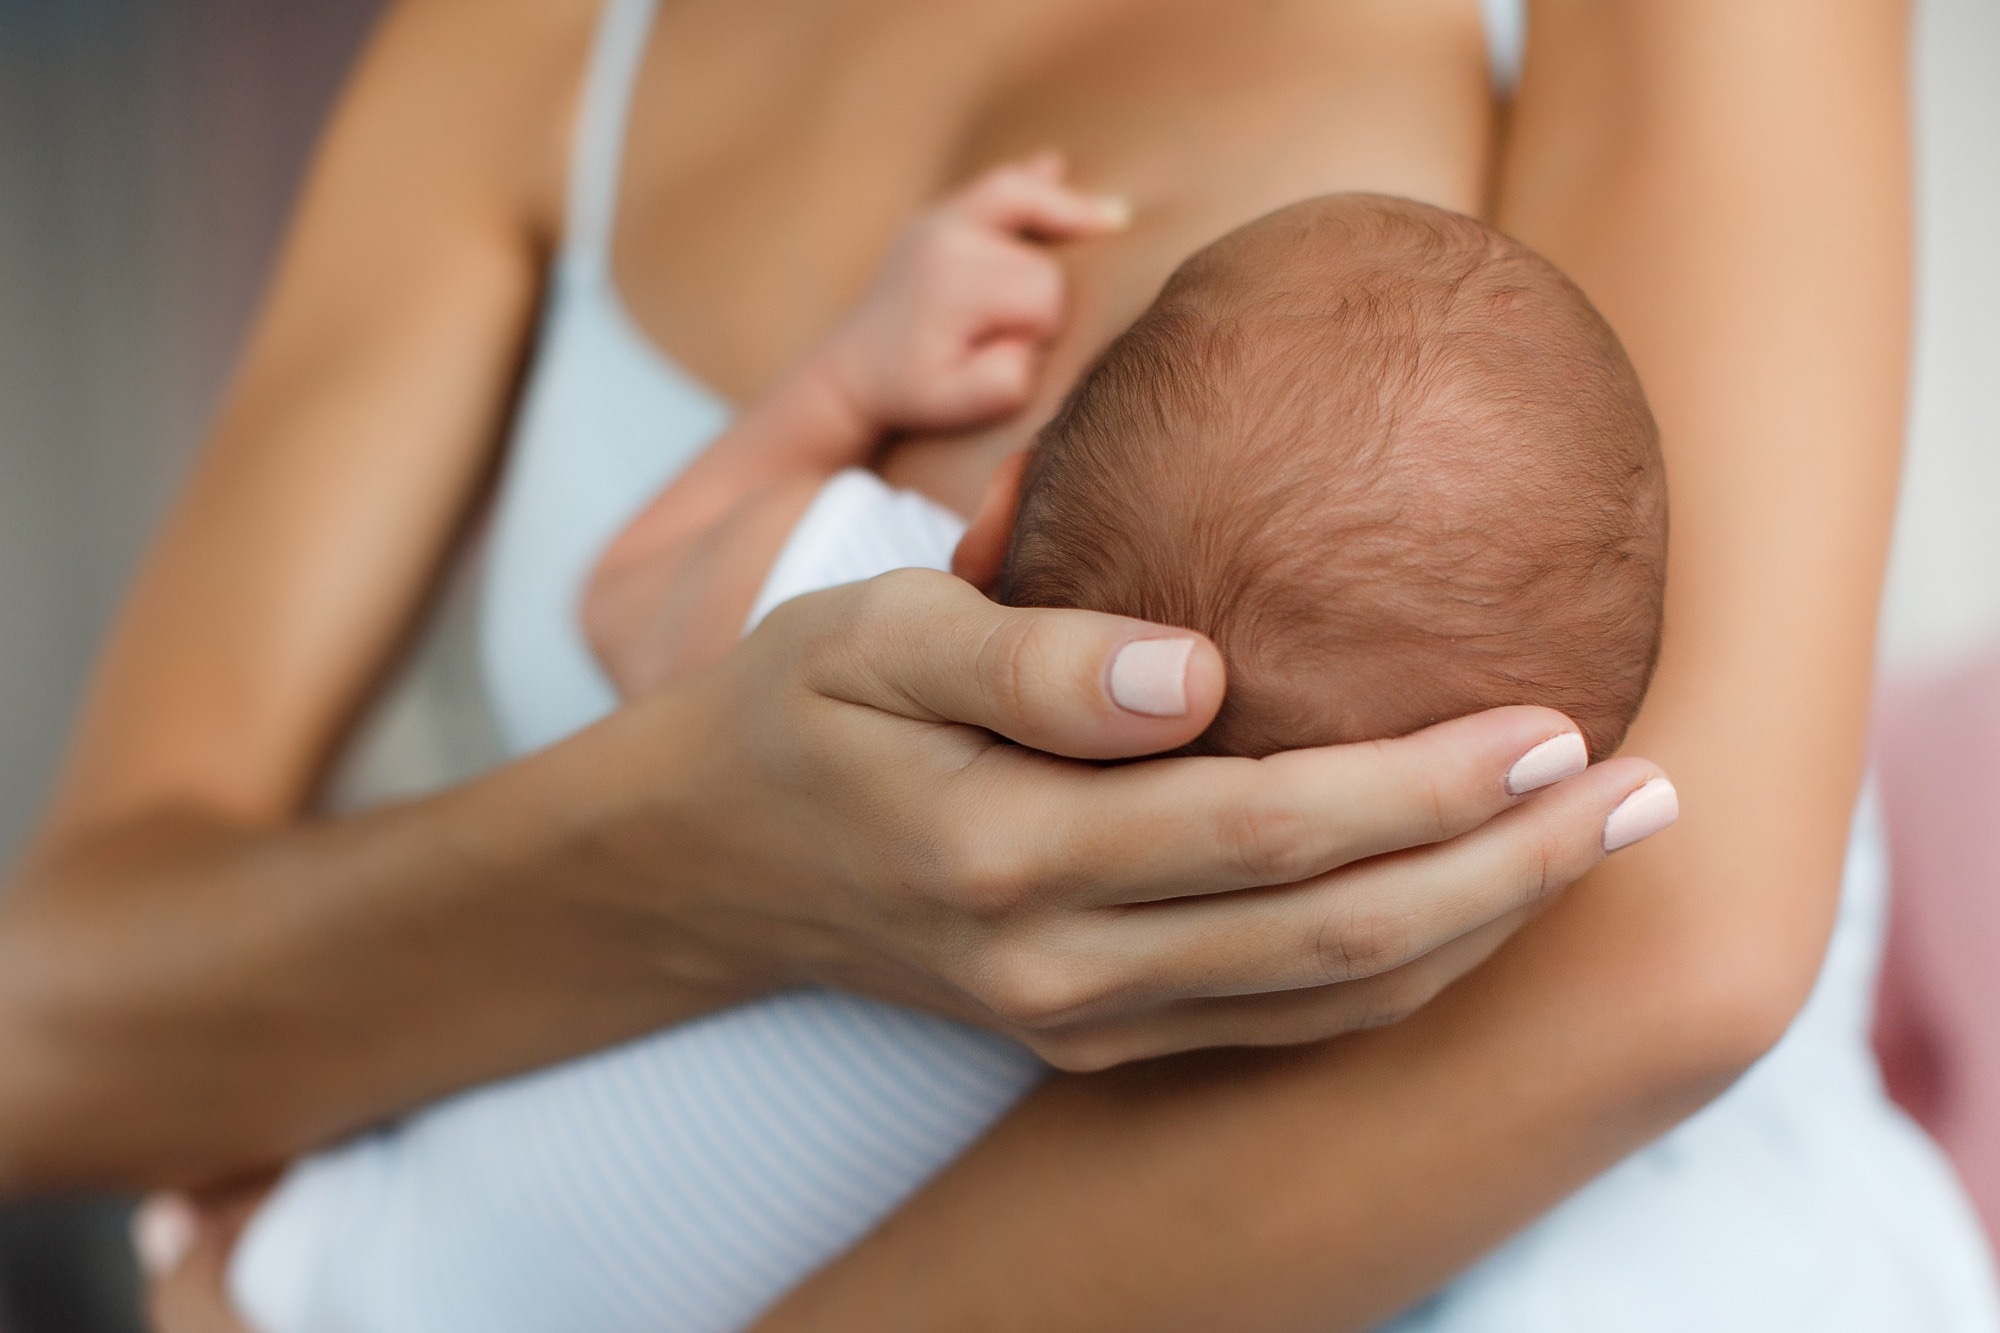 Study: Adherence to vitamin D supplementation recommendations for breastfed infants and young children: an analysis of Canadian Community Health Survey data cycles 2015 to 2018. Image Credit: HTeam / Shutterstock